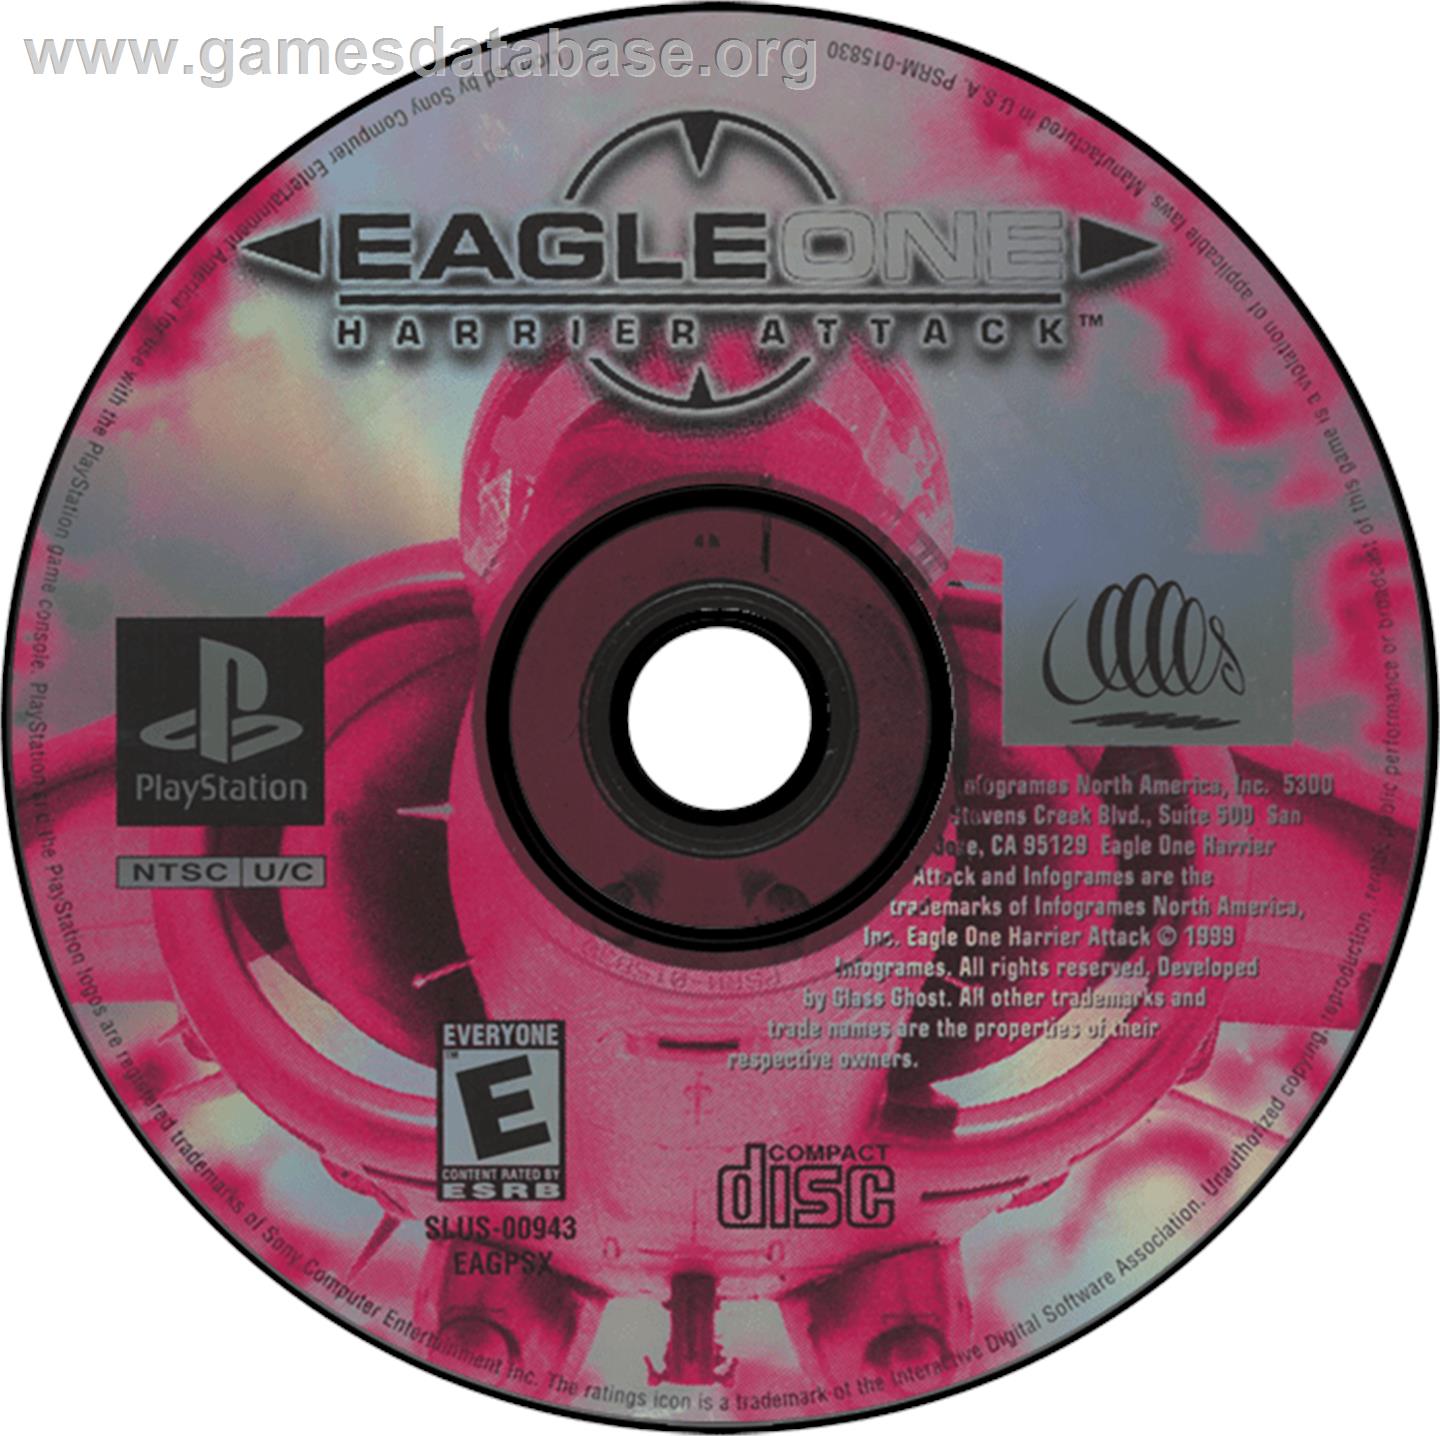 Eagle One: Harrier Attack - Sony Playstation - Artwork - Disc